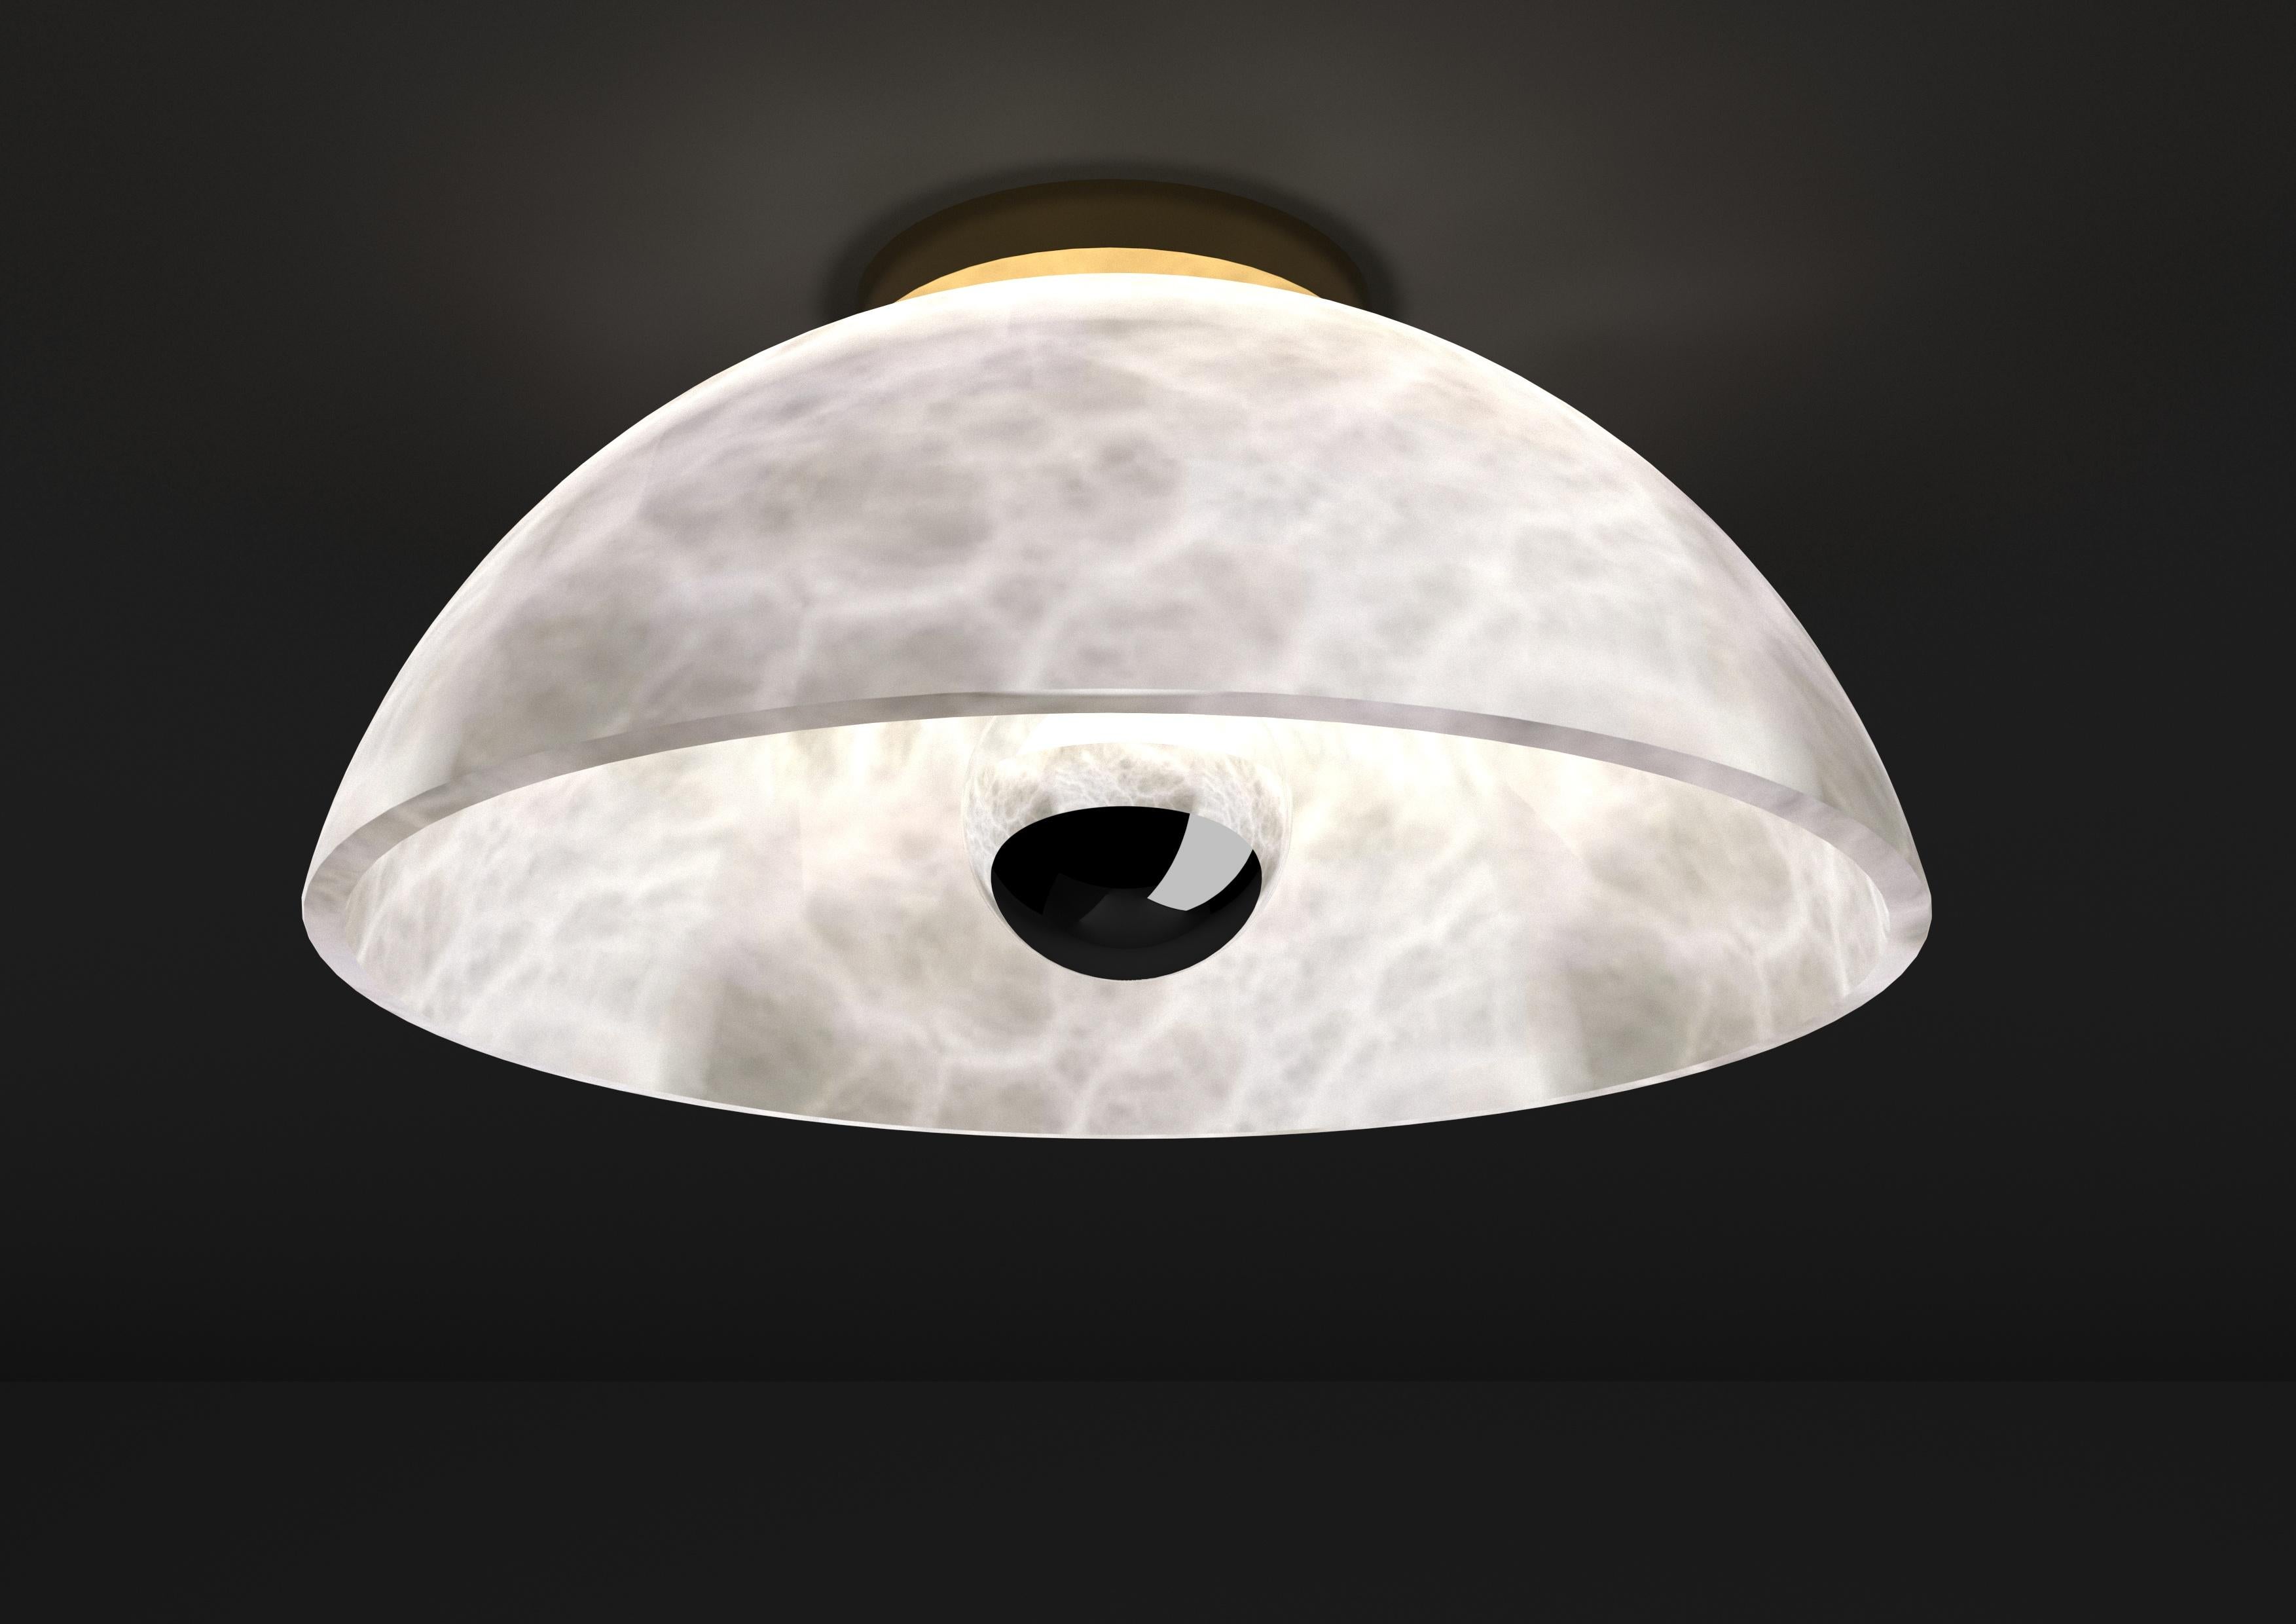 Apollo Shiny Gold Metal Ceiling Lamp by Alabastro Italiano
Dimensions: Ø 30 x W 17,5 cm.
Materials: White alabaster and metal.

Available in different finishes: Shiny Silver, Bronze, Brushed Brass, Ruggine of Florence, Brushed Burnished, Shiny Gold,